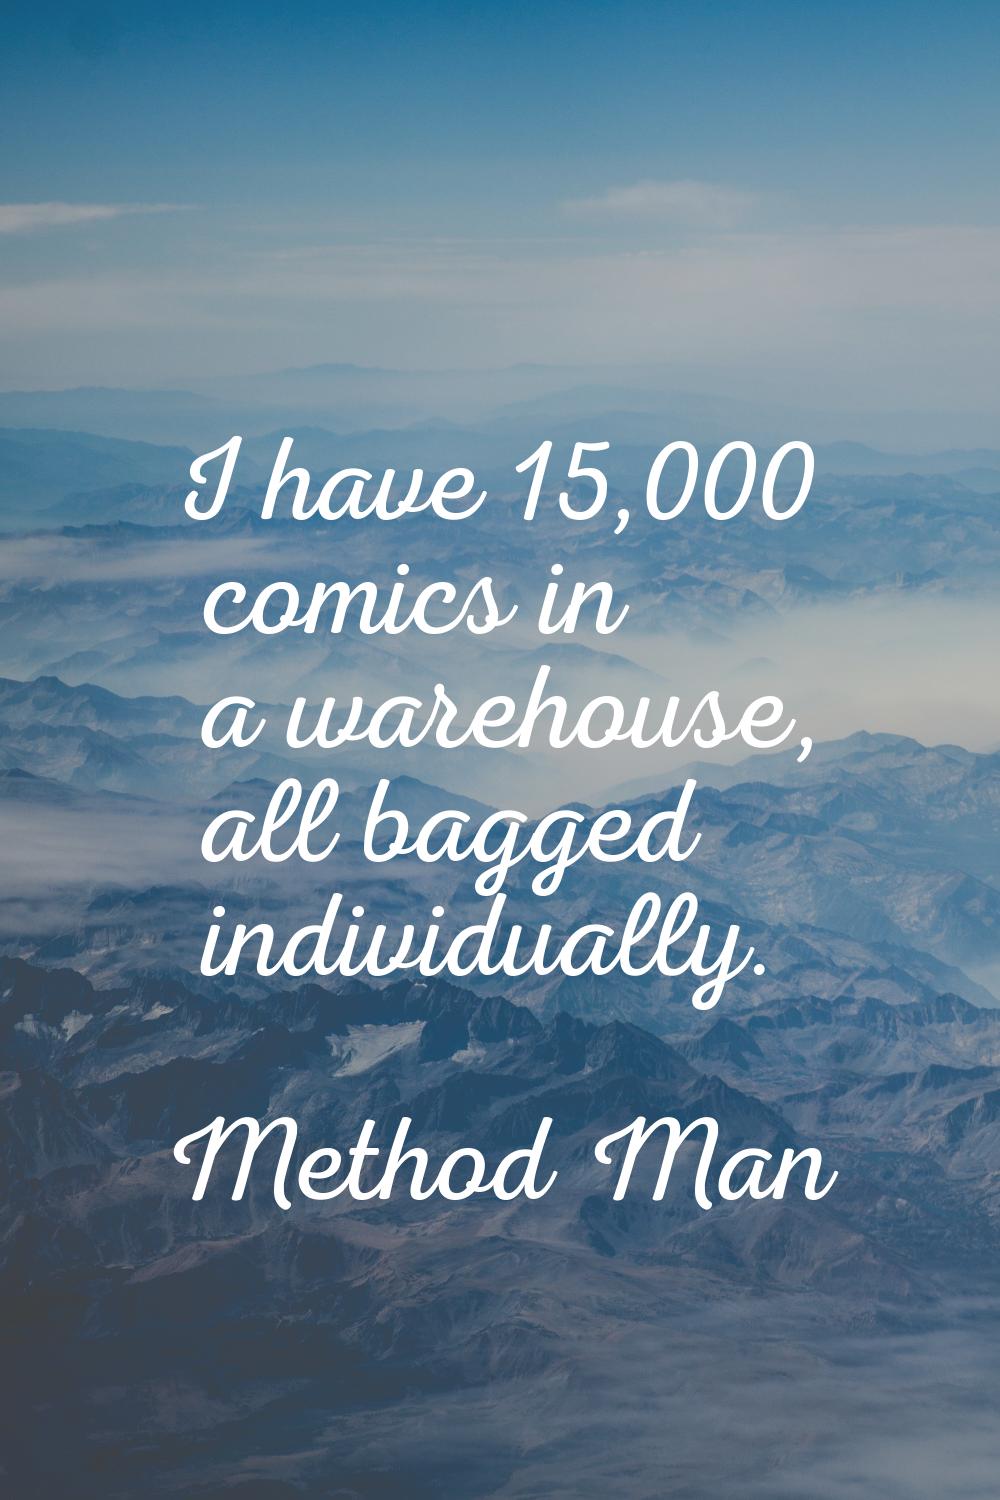 I have 15,000 comics in a warehouse, all bagged individually.